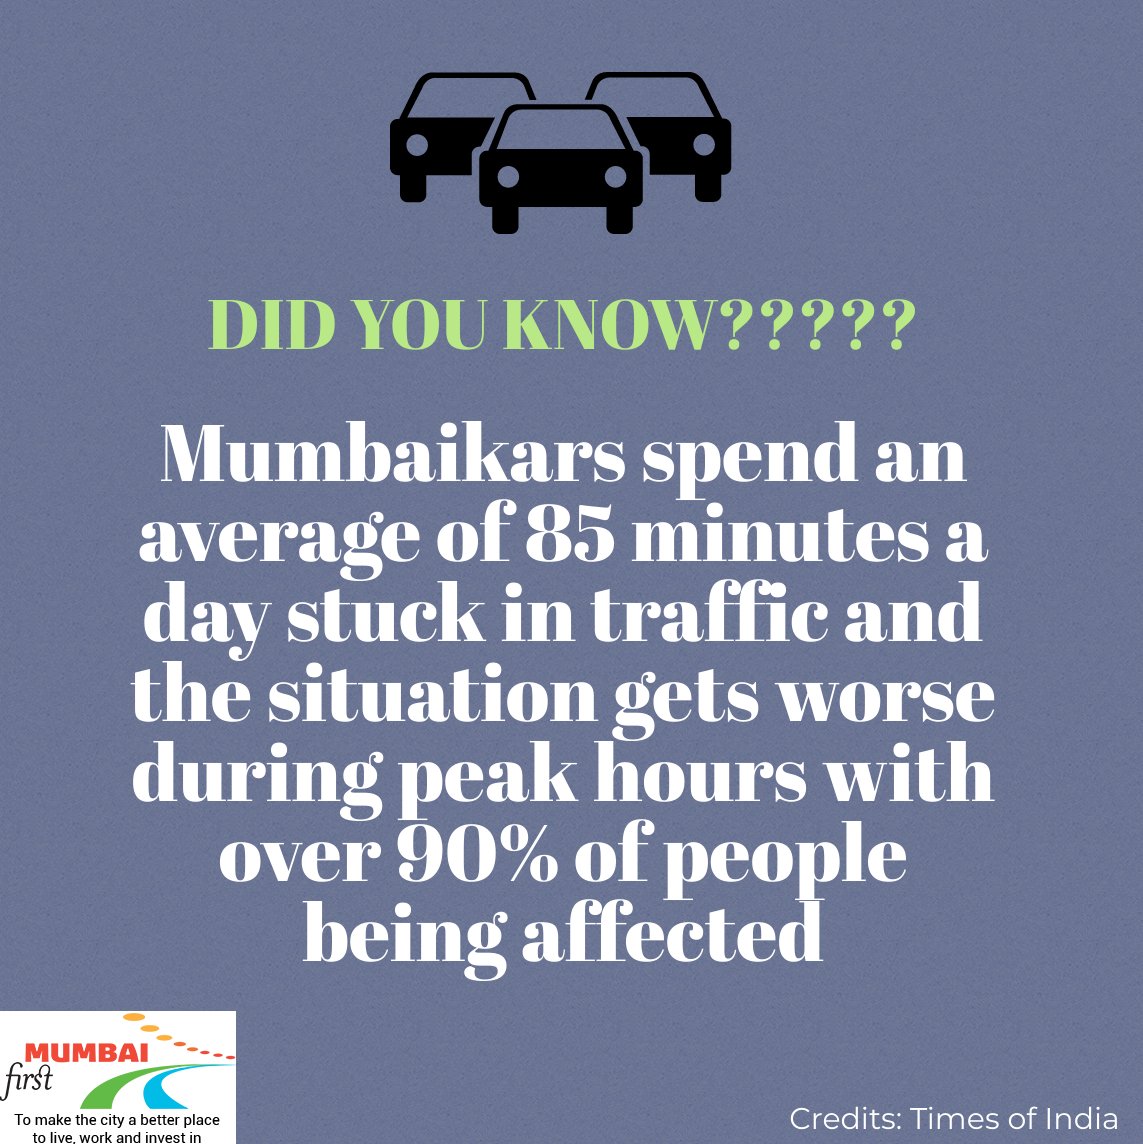 The study covered 1,200 respondents including private car users, motorcyclists, office car users, kaali peeli taxi and app cab drivers. #mumbaitransport